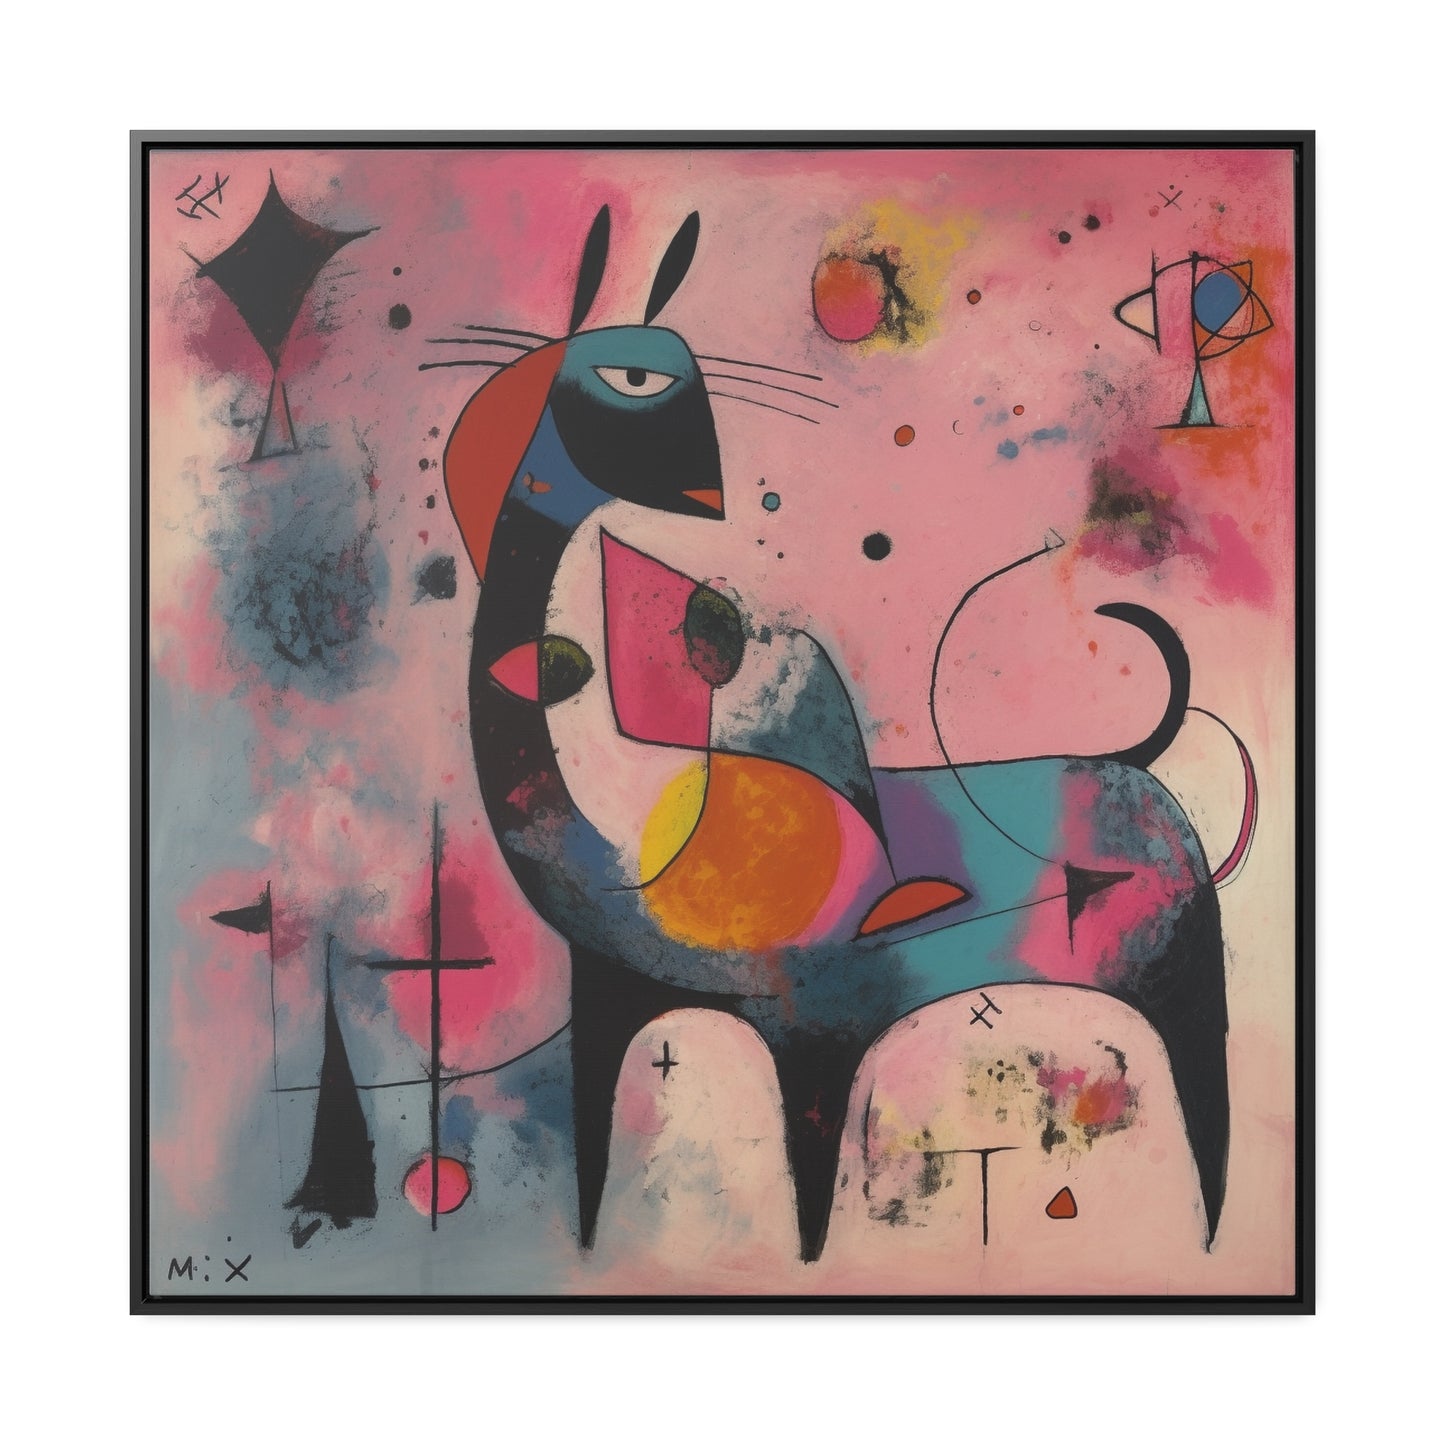 The Dreams of the Child 33, Gallery Canvas Wraps, Square Frame